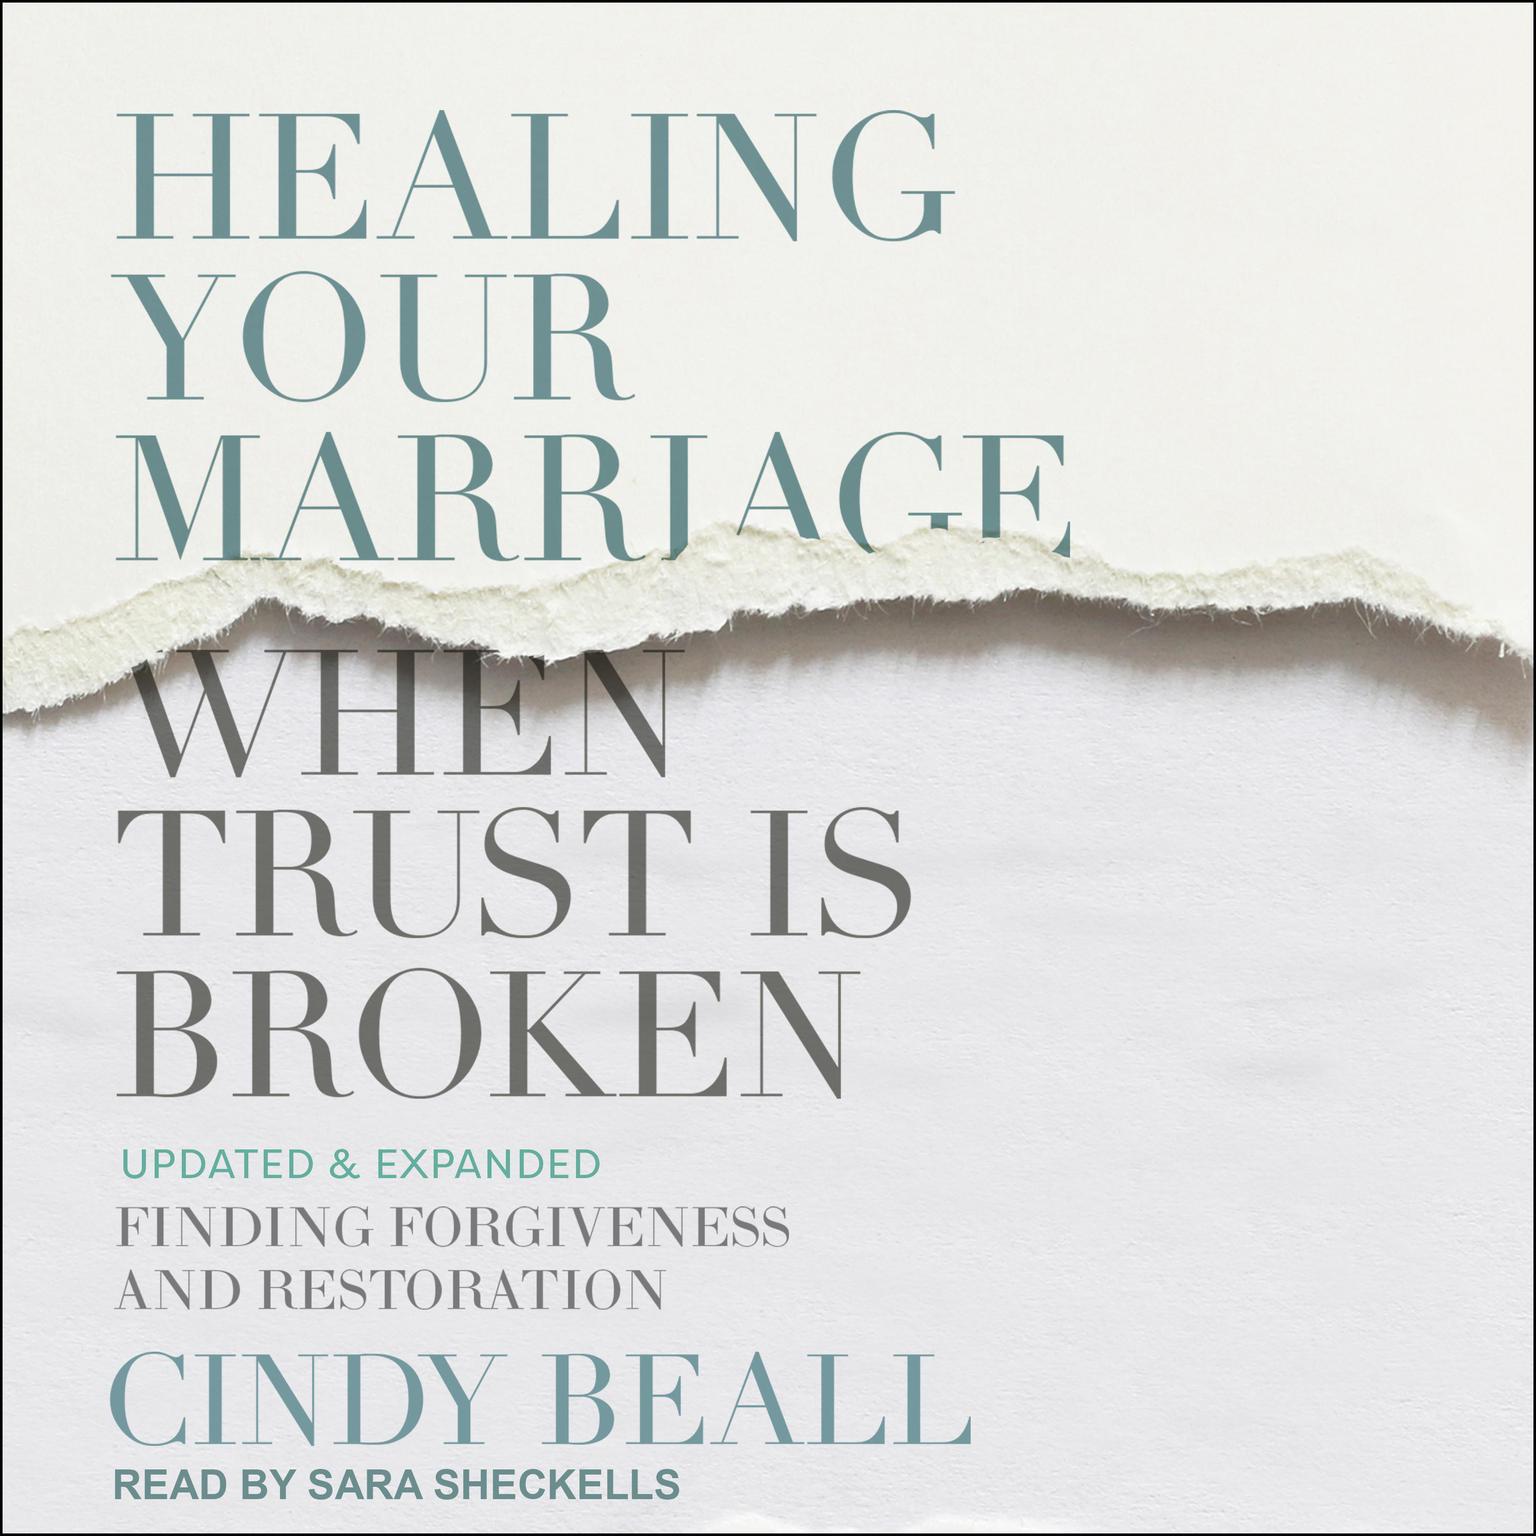 Healing Your Marriage When Trust is Broken: Finding Forgiveness and Restoration: Updated & Expanded Audiobook, by Cindy Beall